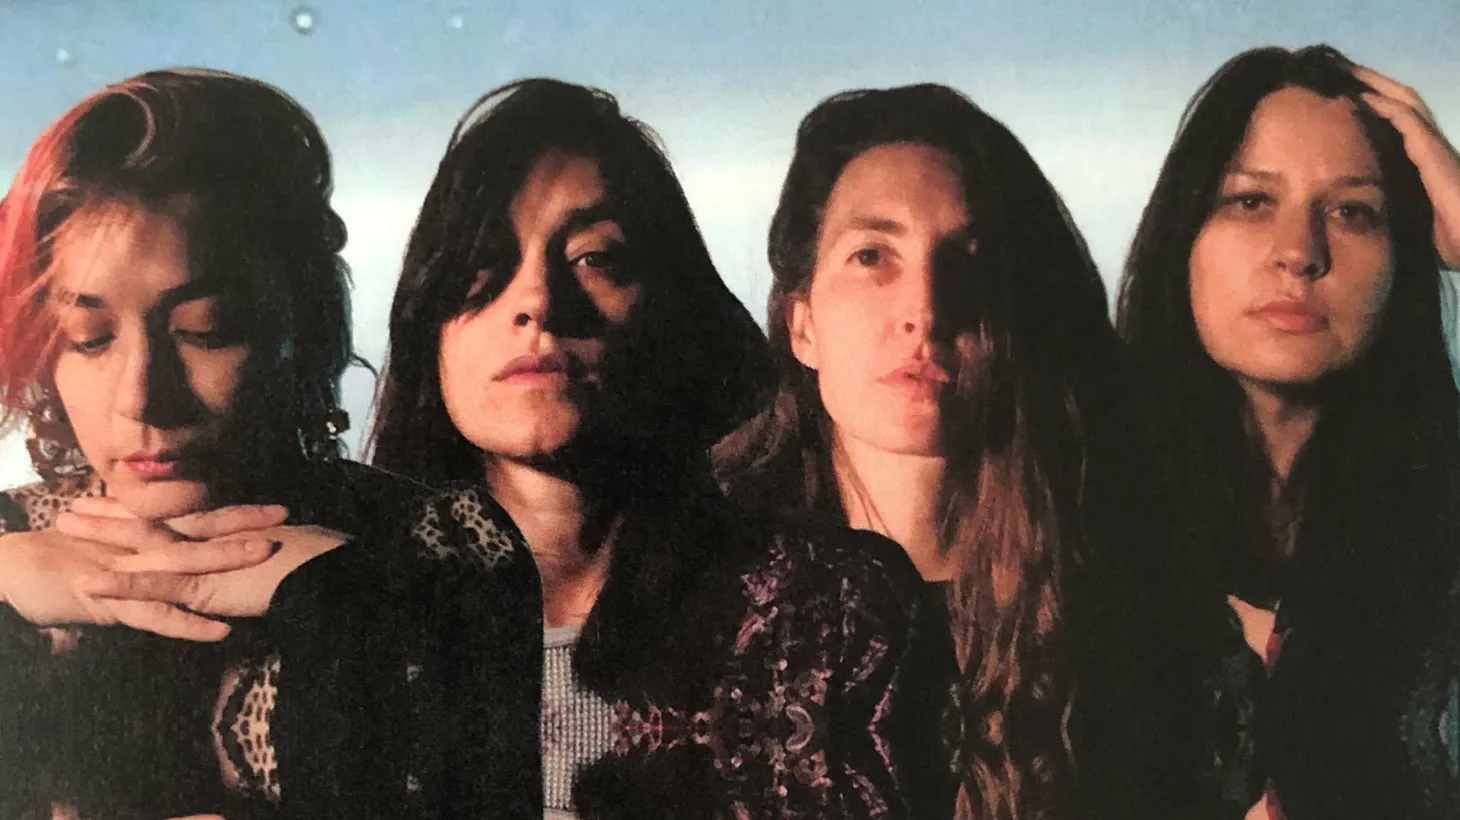 Hallelujah! Warpaint is back with their first album in six years! After pursuing individual projects, the LA outfit is finally drawn back together to materialize their auditory ideas.